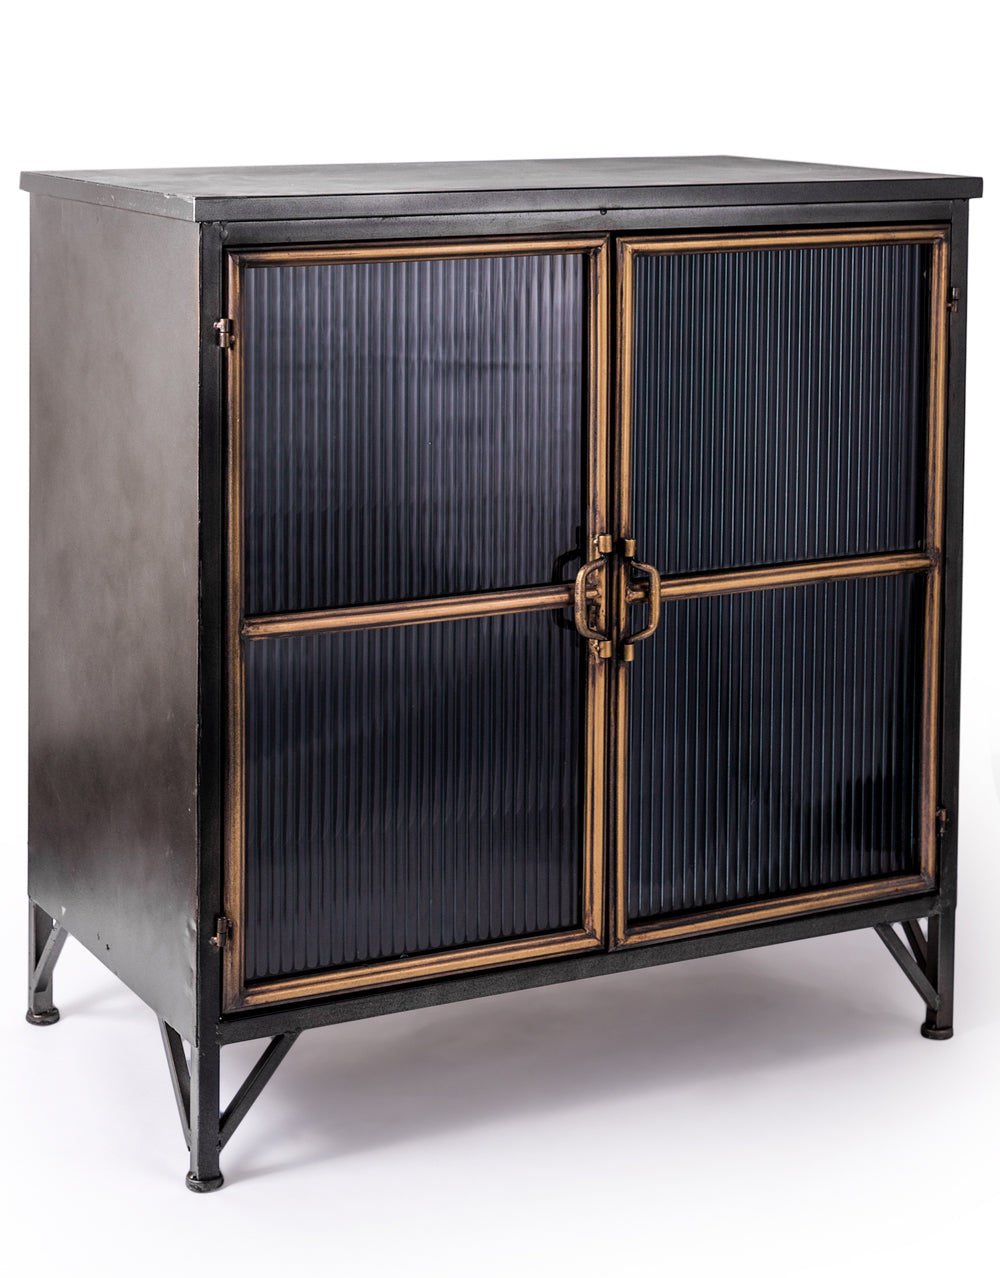 Black and Antique Gold "Orwell" Wide Cabinet